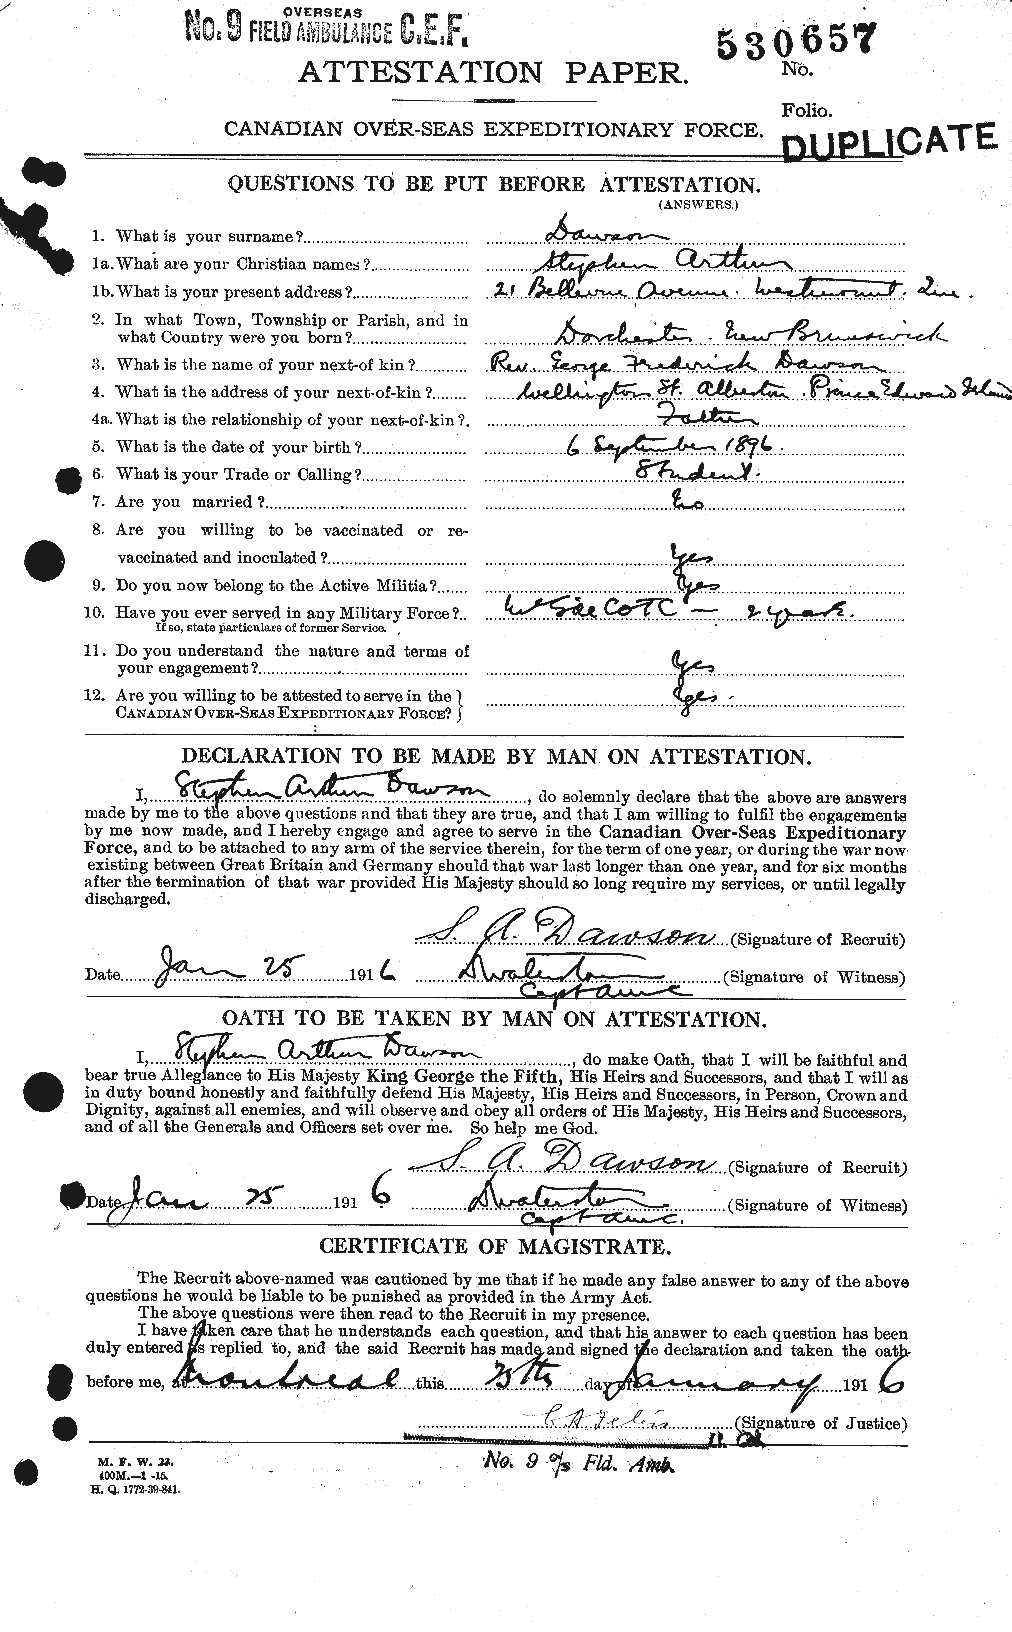 Personnel Records of the First World War - CEF 282821a